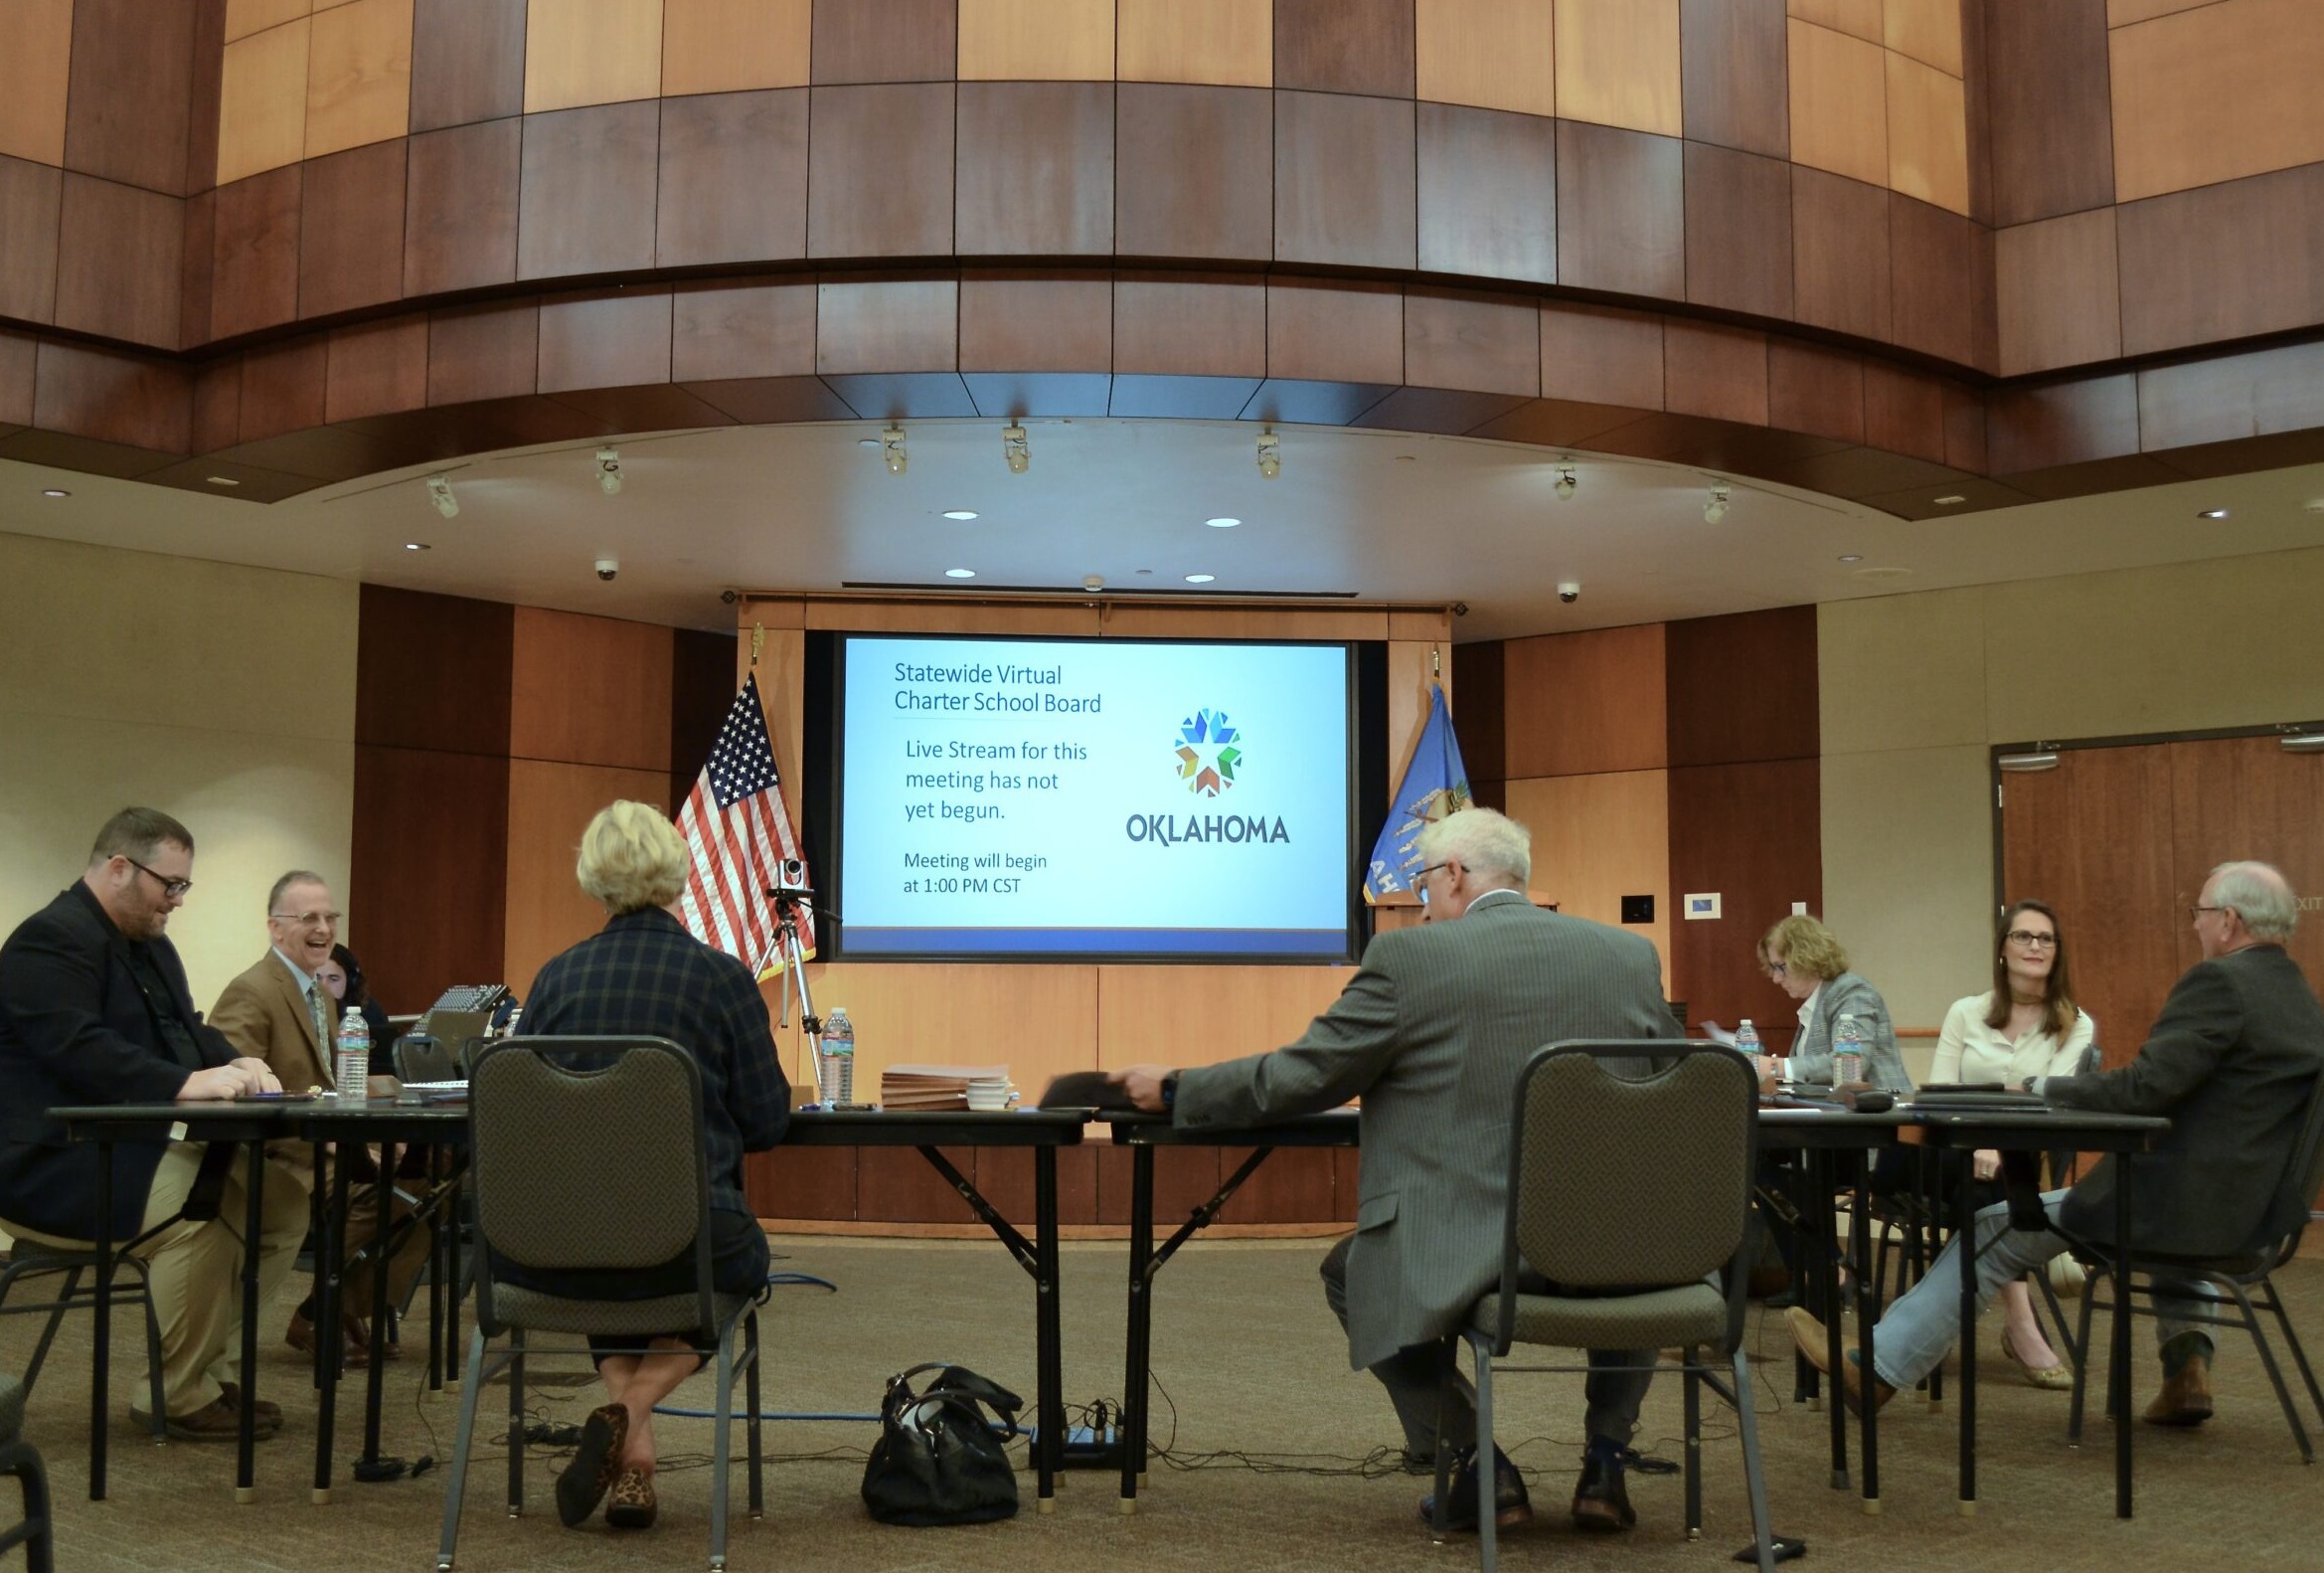 Oklahoma virtual charter schools: Several people in business-wear sit in a formal meeting room at a circle of tables, some with backs to camera, looking at a presentation screen and having a discussion .